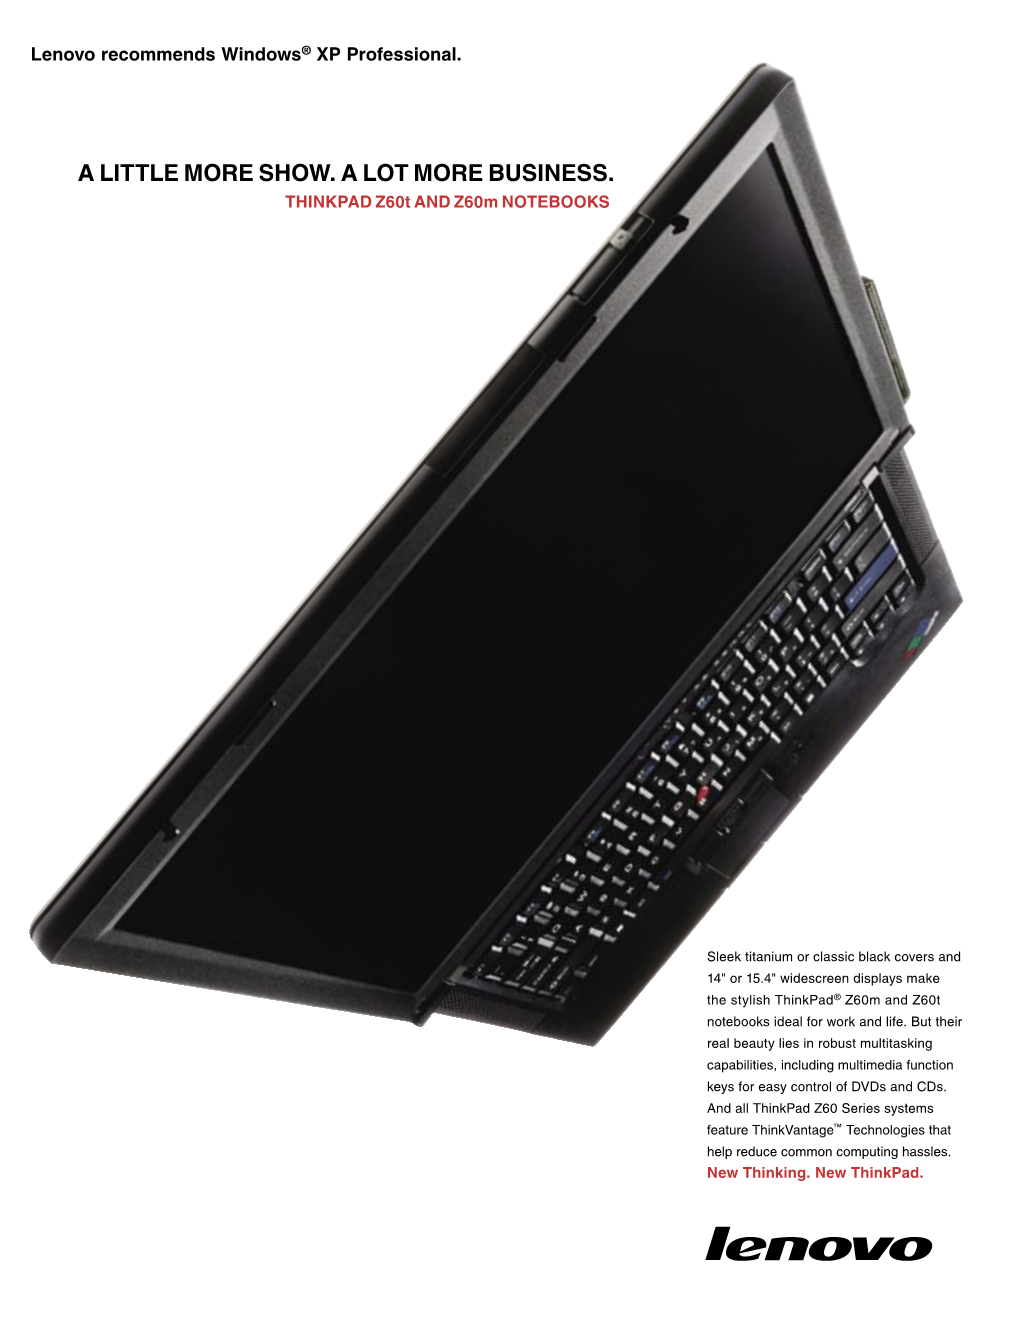 A LITTLE MORE SHOW. a LOT MORE BUSINESS. THINKPAD Z60t and Z60m NOTEBOOKS